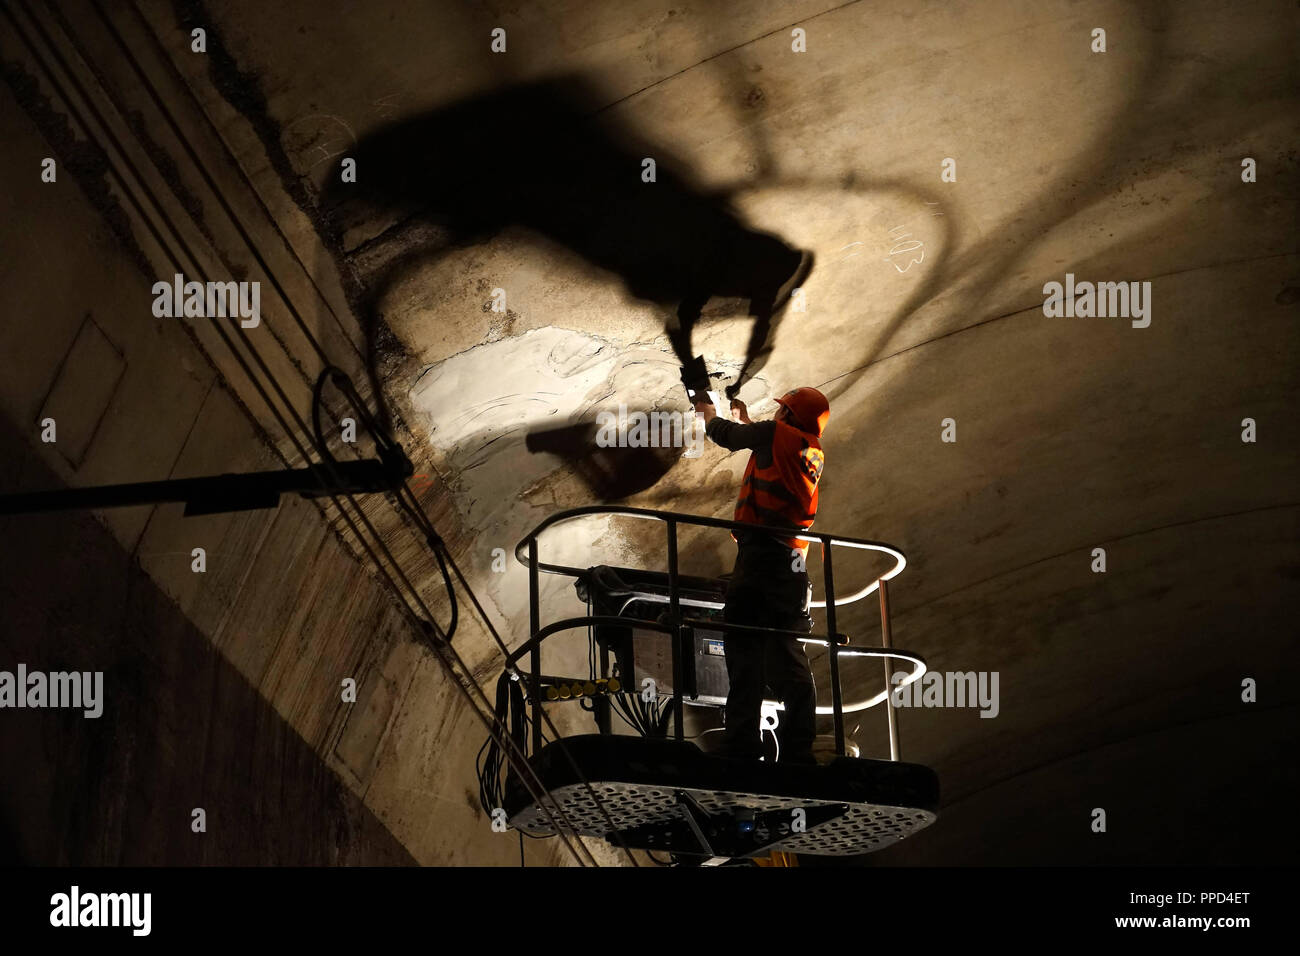 During the nighttime inspection experts of the Munich S-Bahn tunnel look for attrition and damage and mend broken bodies. The photo shows an employee of a construction company repairing a damaged area in the tunnel under the Marienplatz. Stock Photo